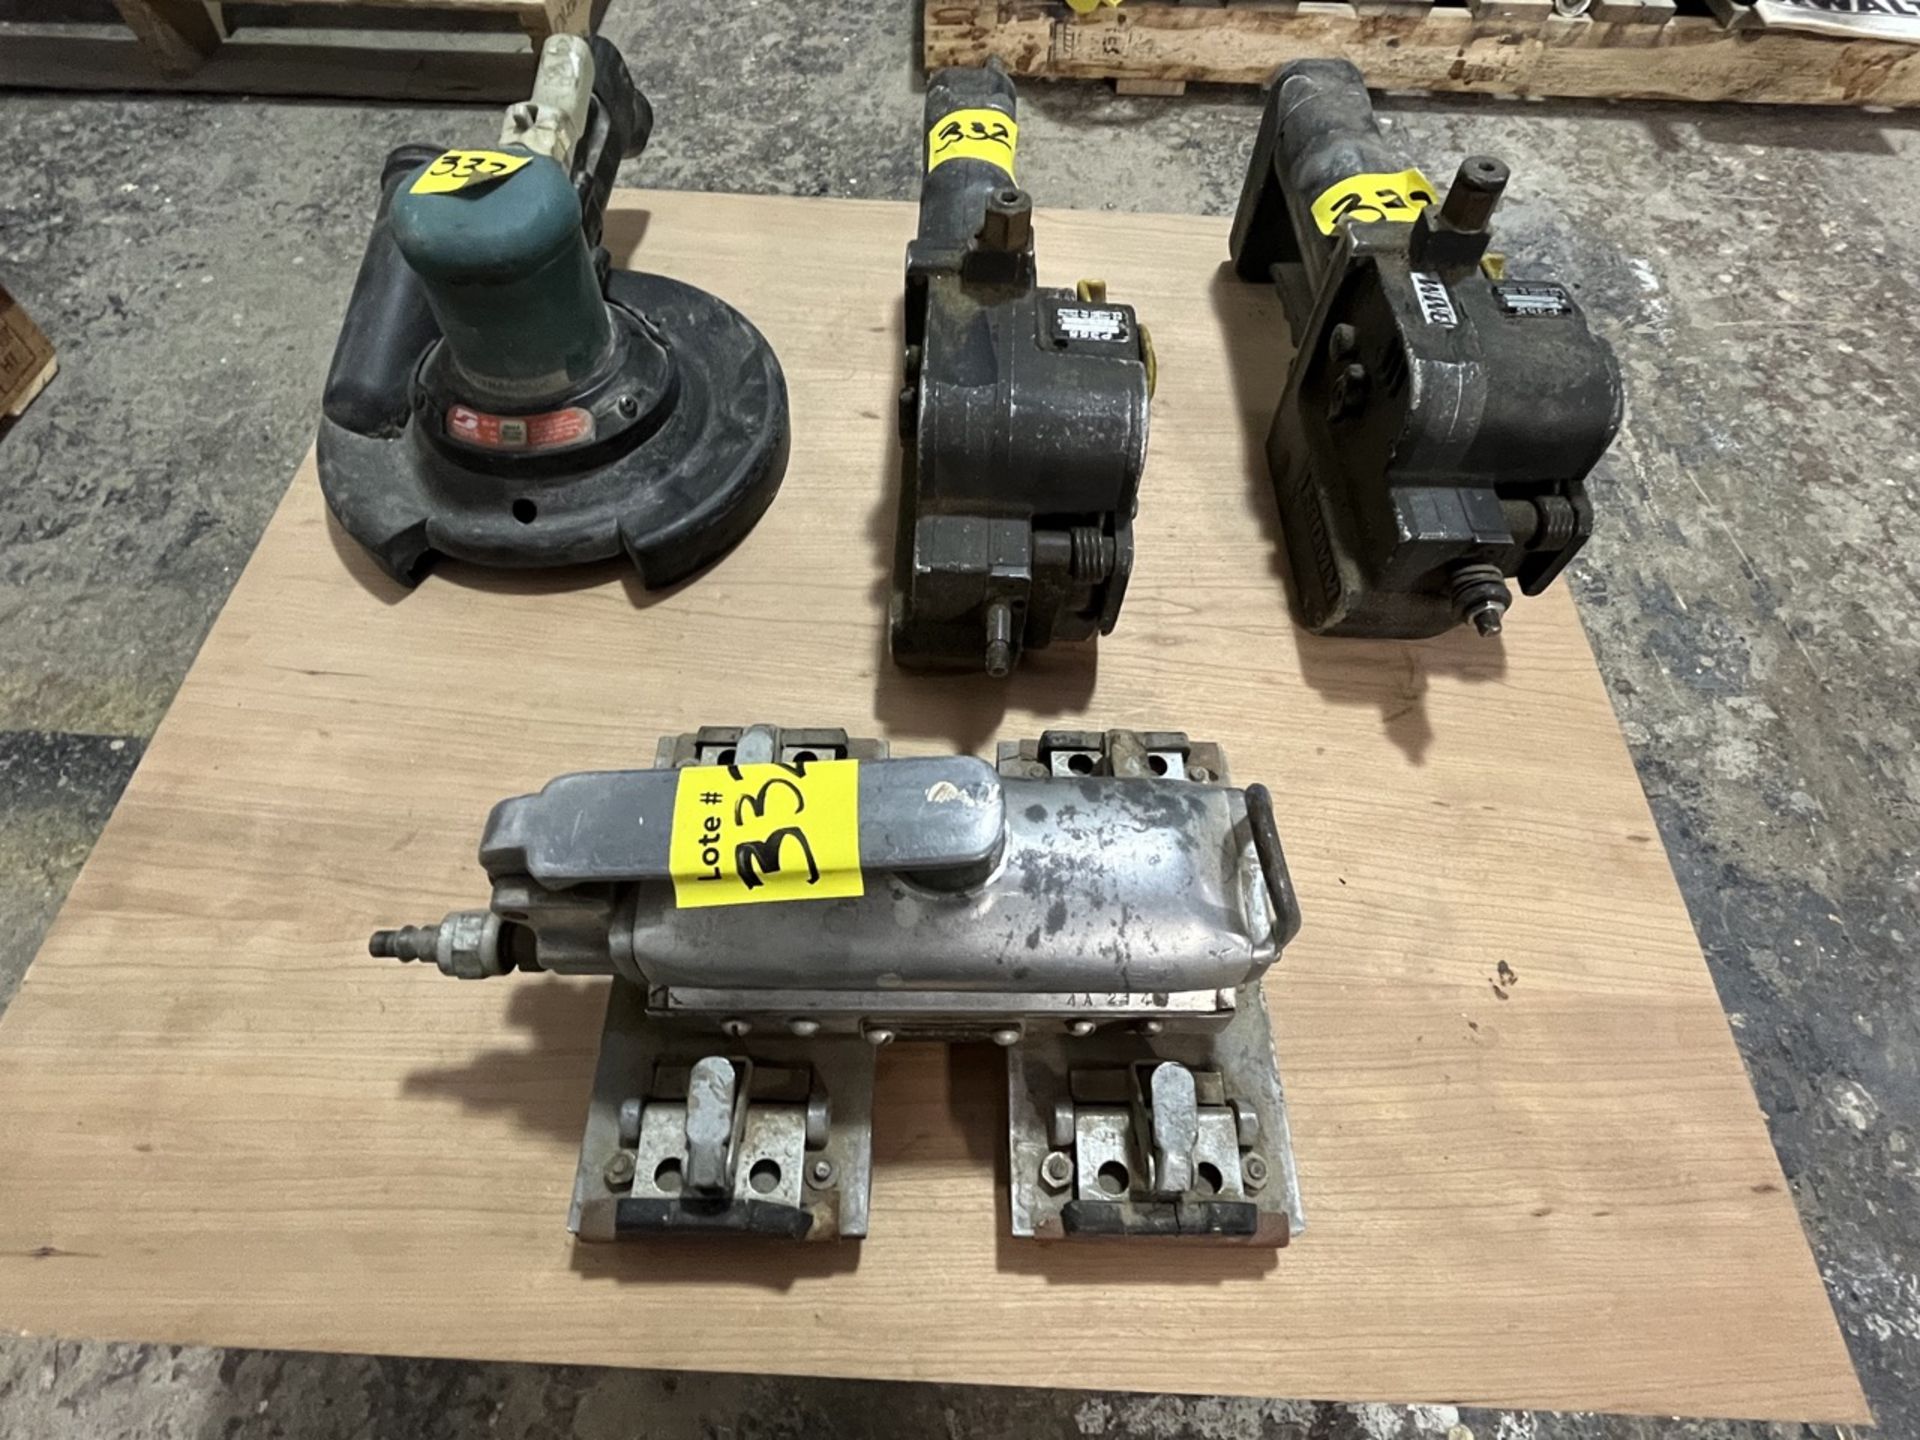 Lot of 4 pieces contains: 2 Fromm brand pneumatic wood brushes; 1 Sundstrand brand pneumatic sander